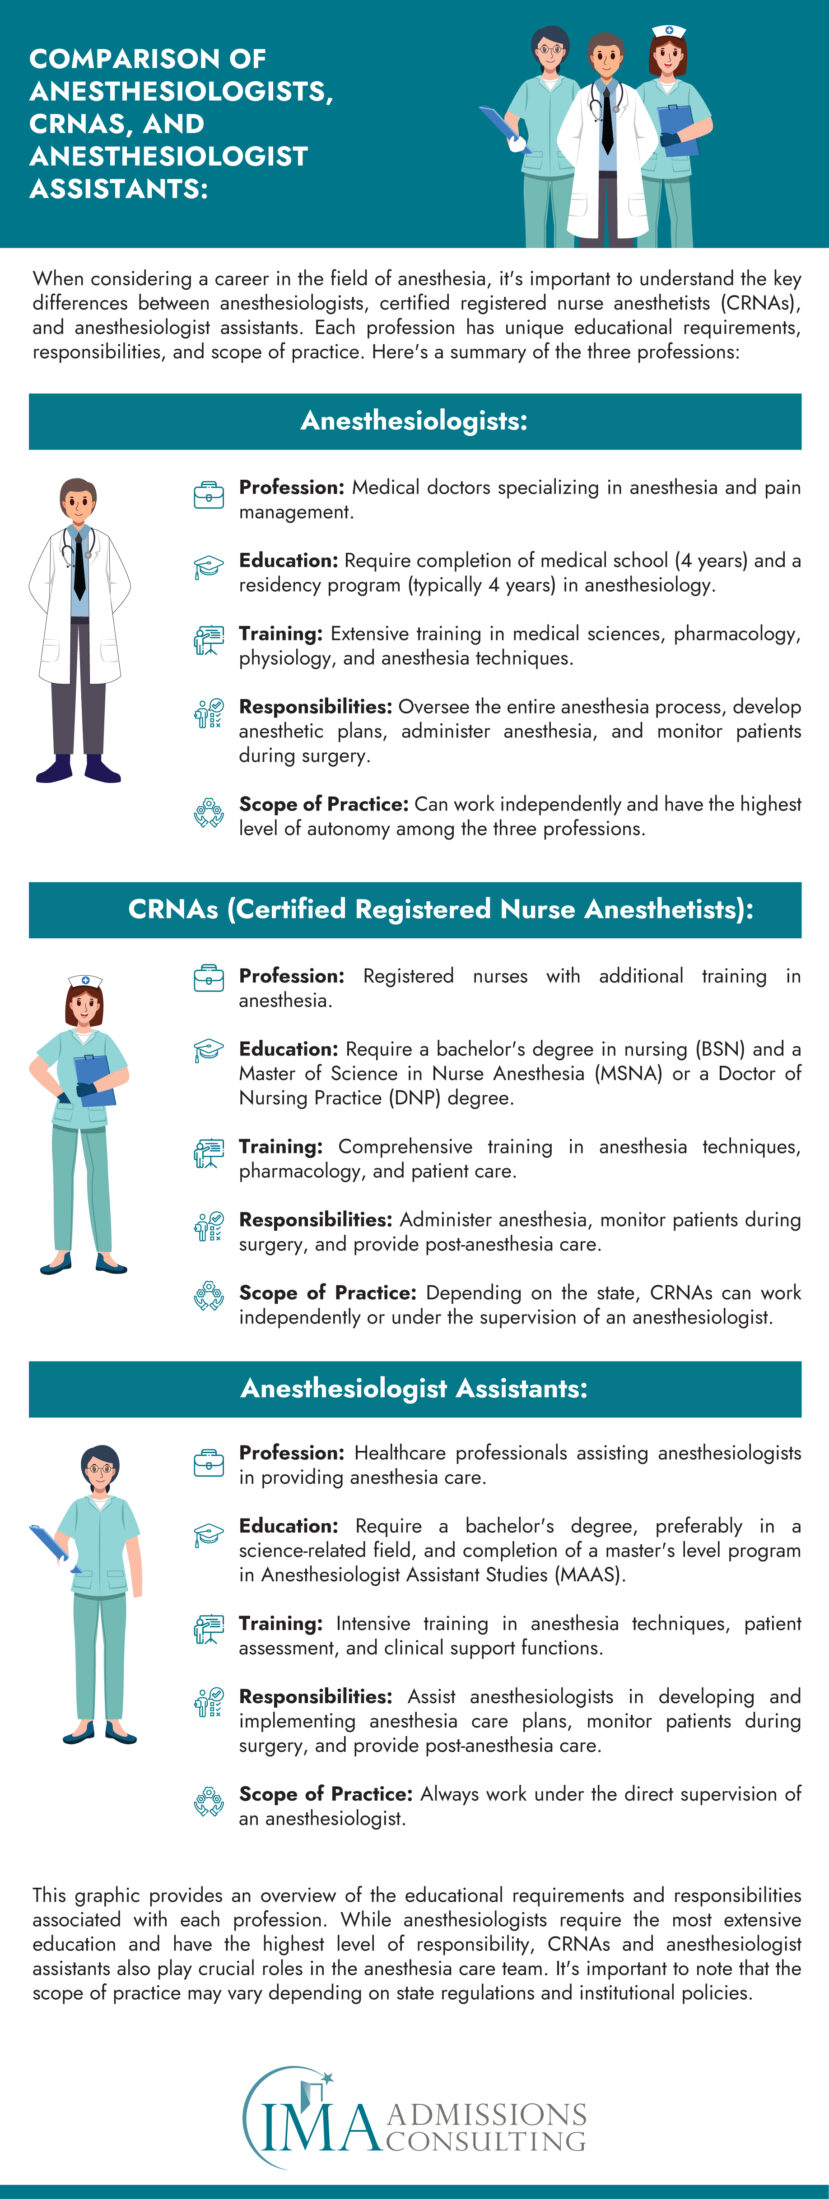 Comparison of Anesthesiologists, CRNAs, and Anesthesiologist Assistants